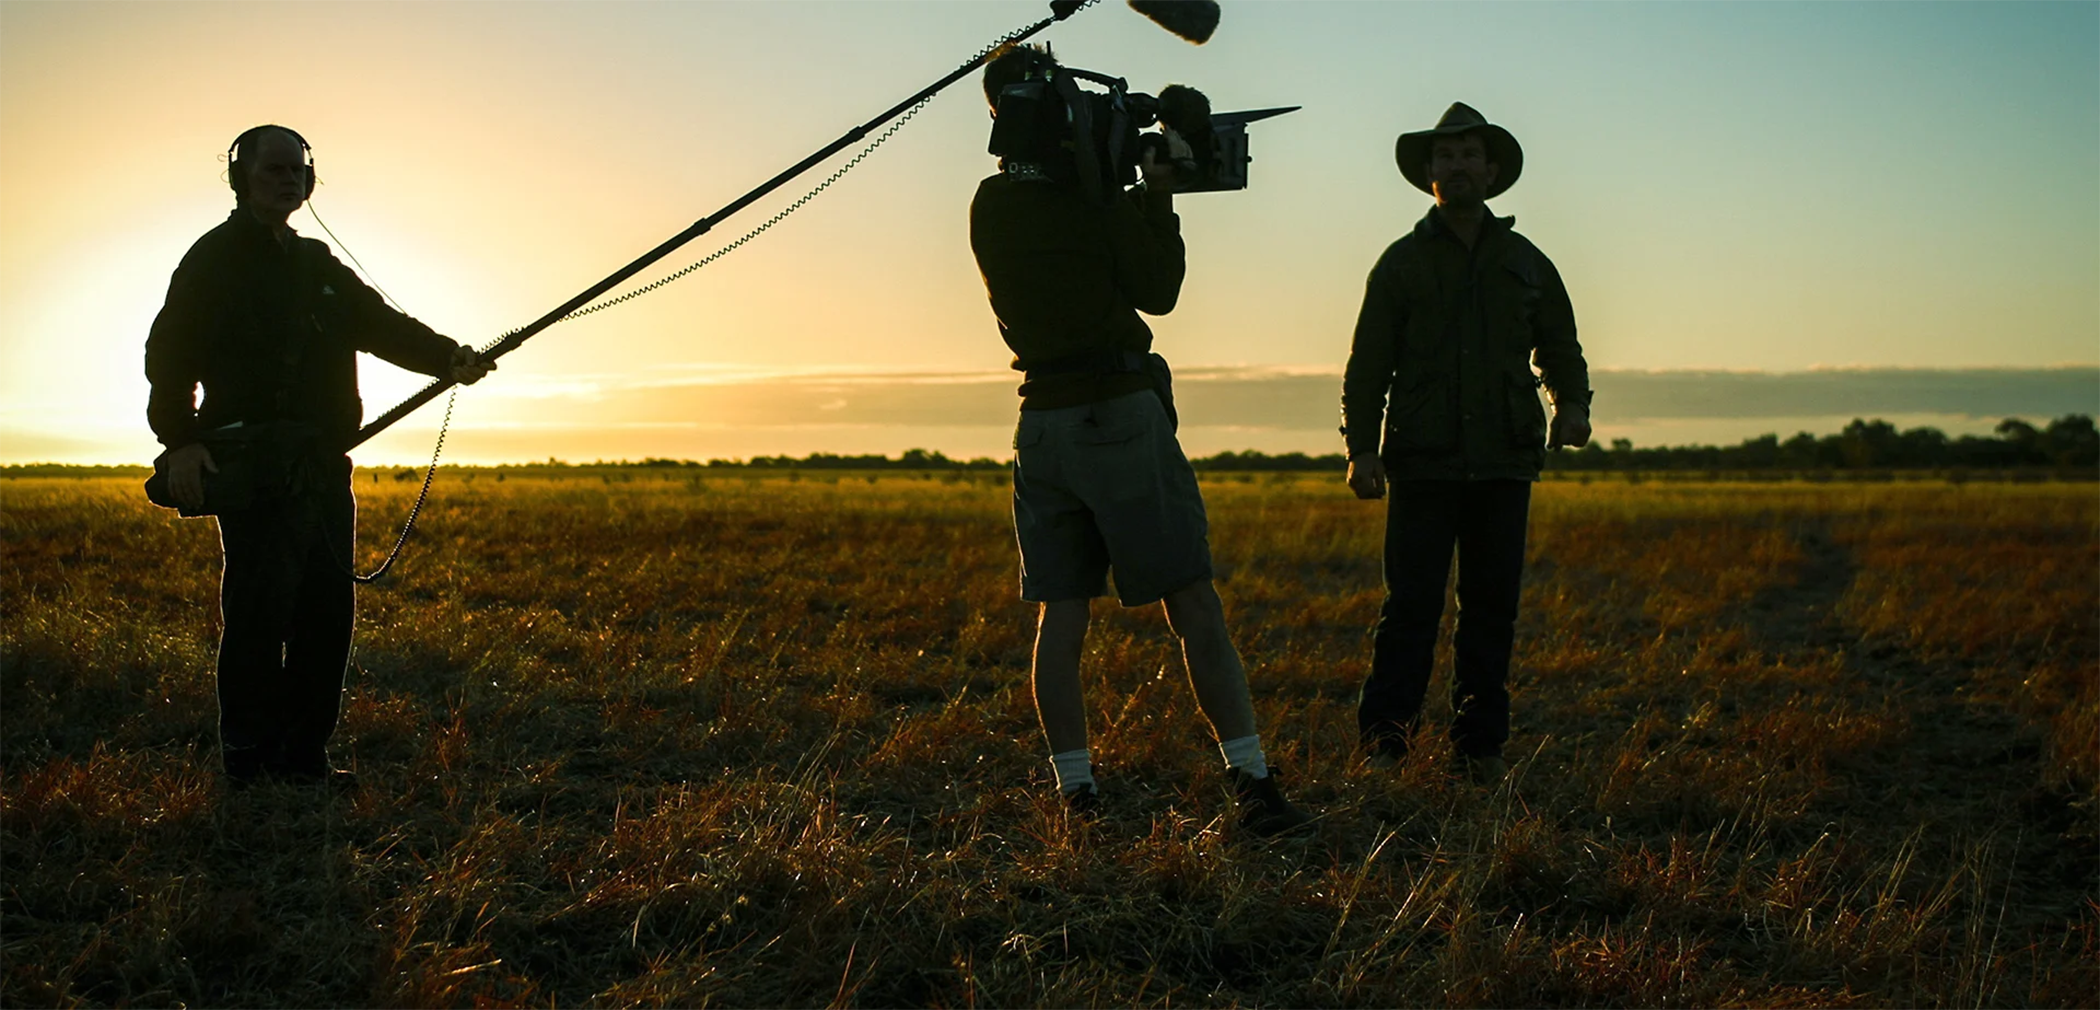 Film crew on location in a field at dusk